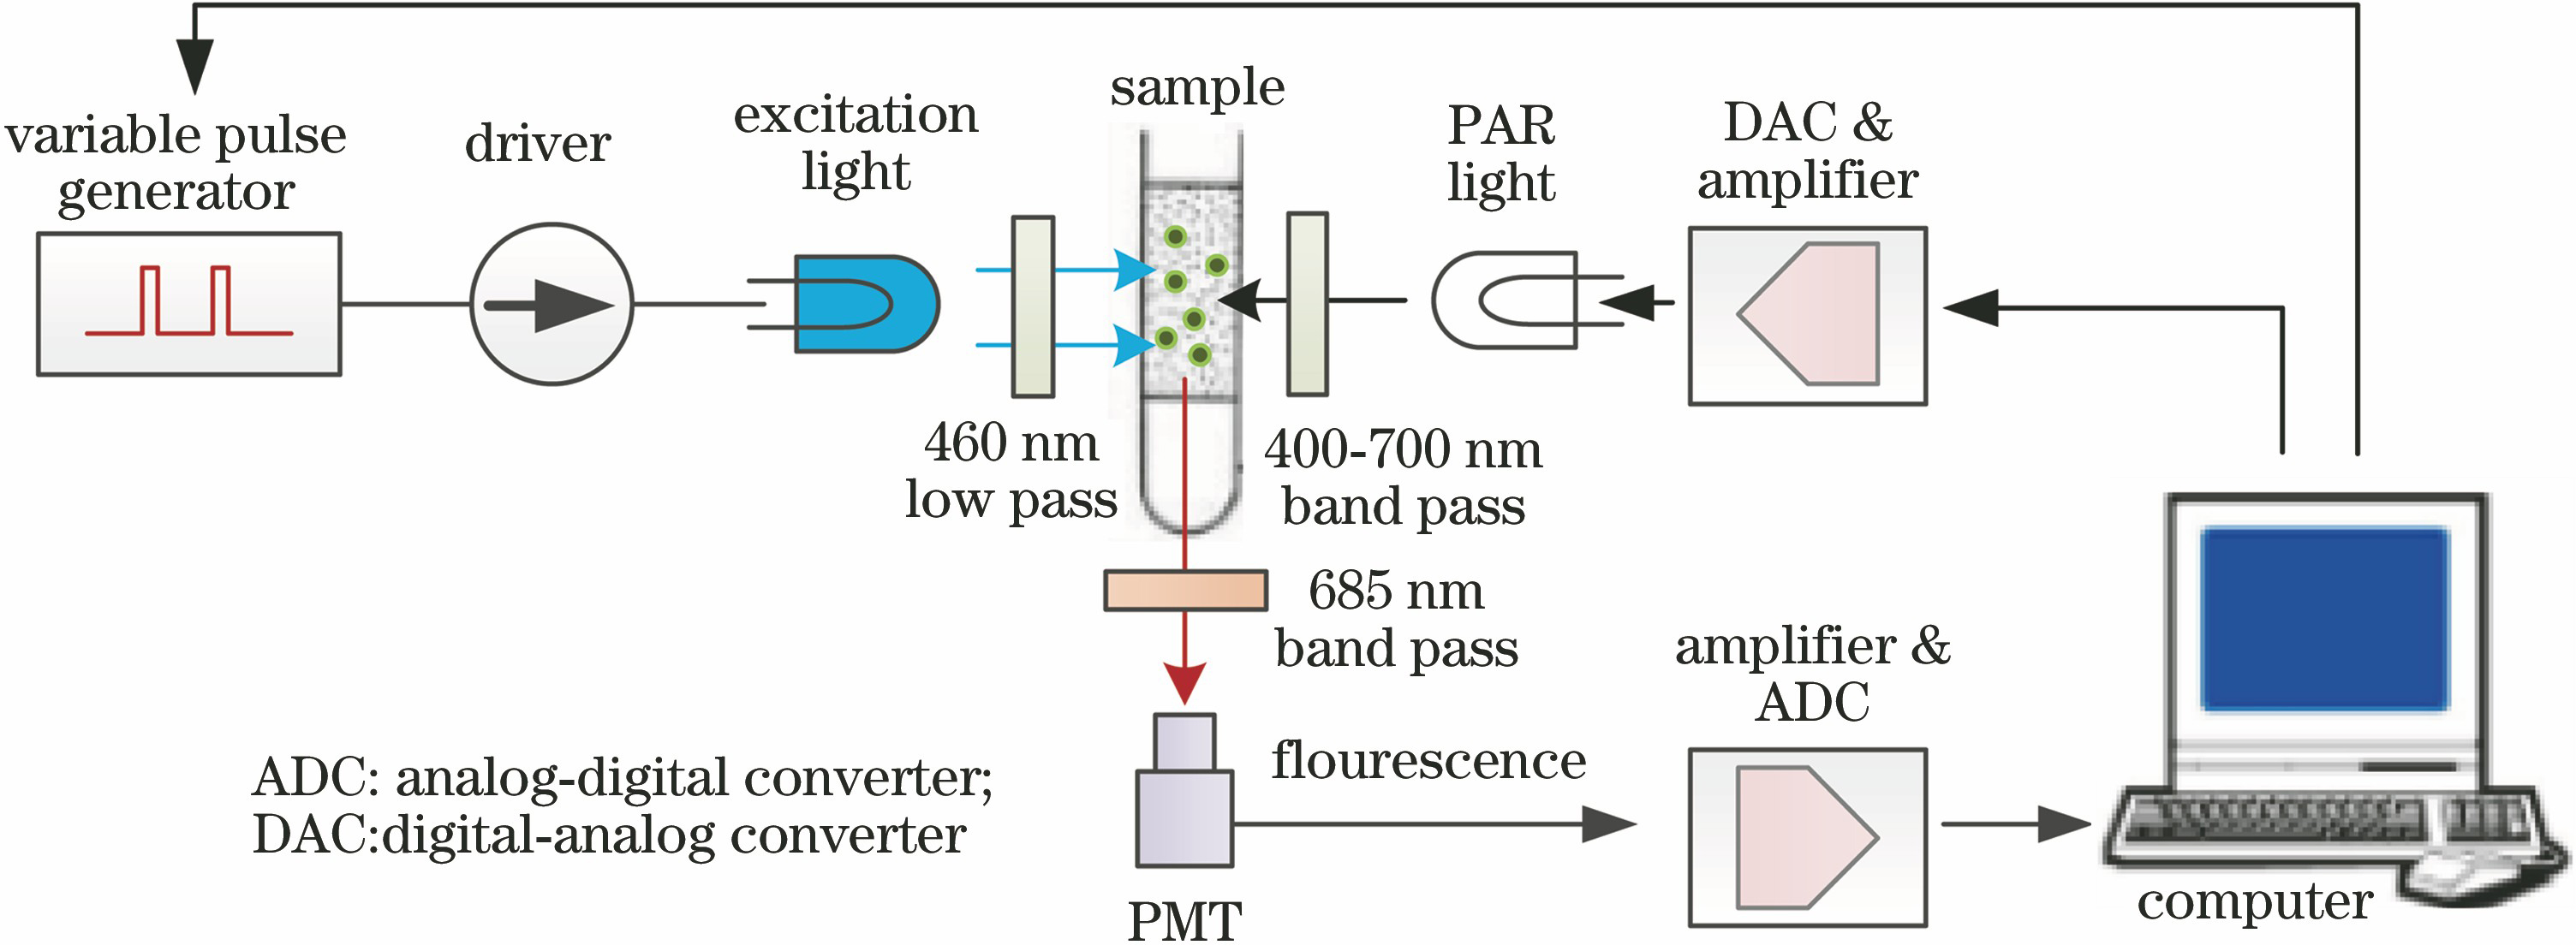 Schematic diagram of chlorophyll fluorescence analyzer induced by variable light pulse